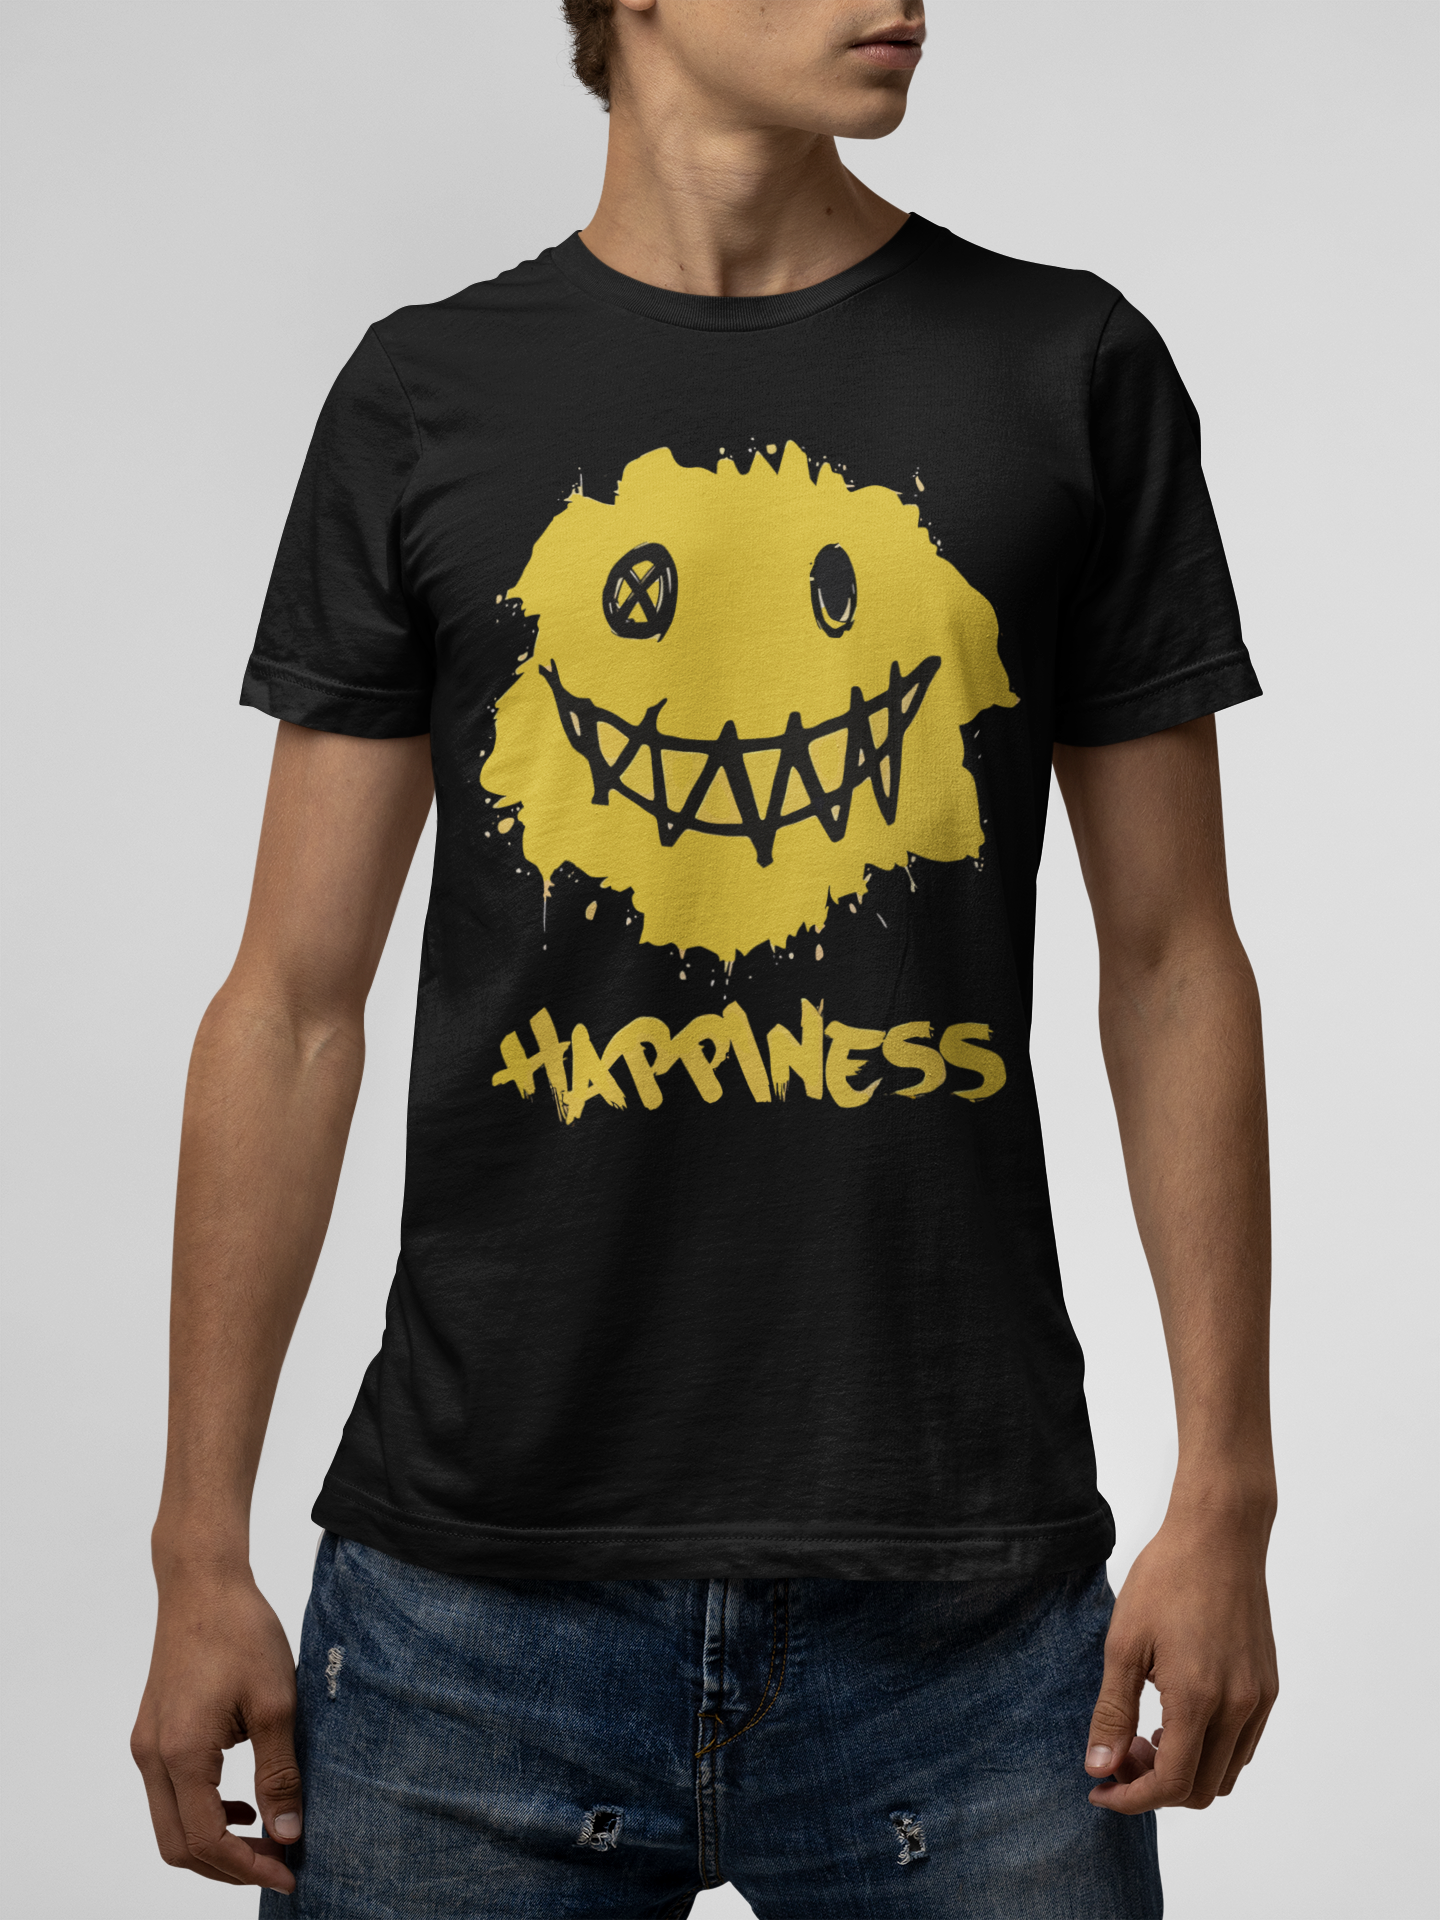 Happiness Black T-Shirt For Men